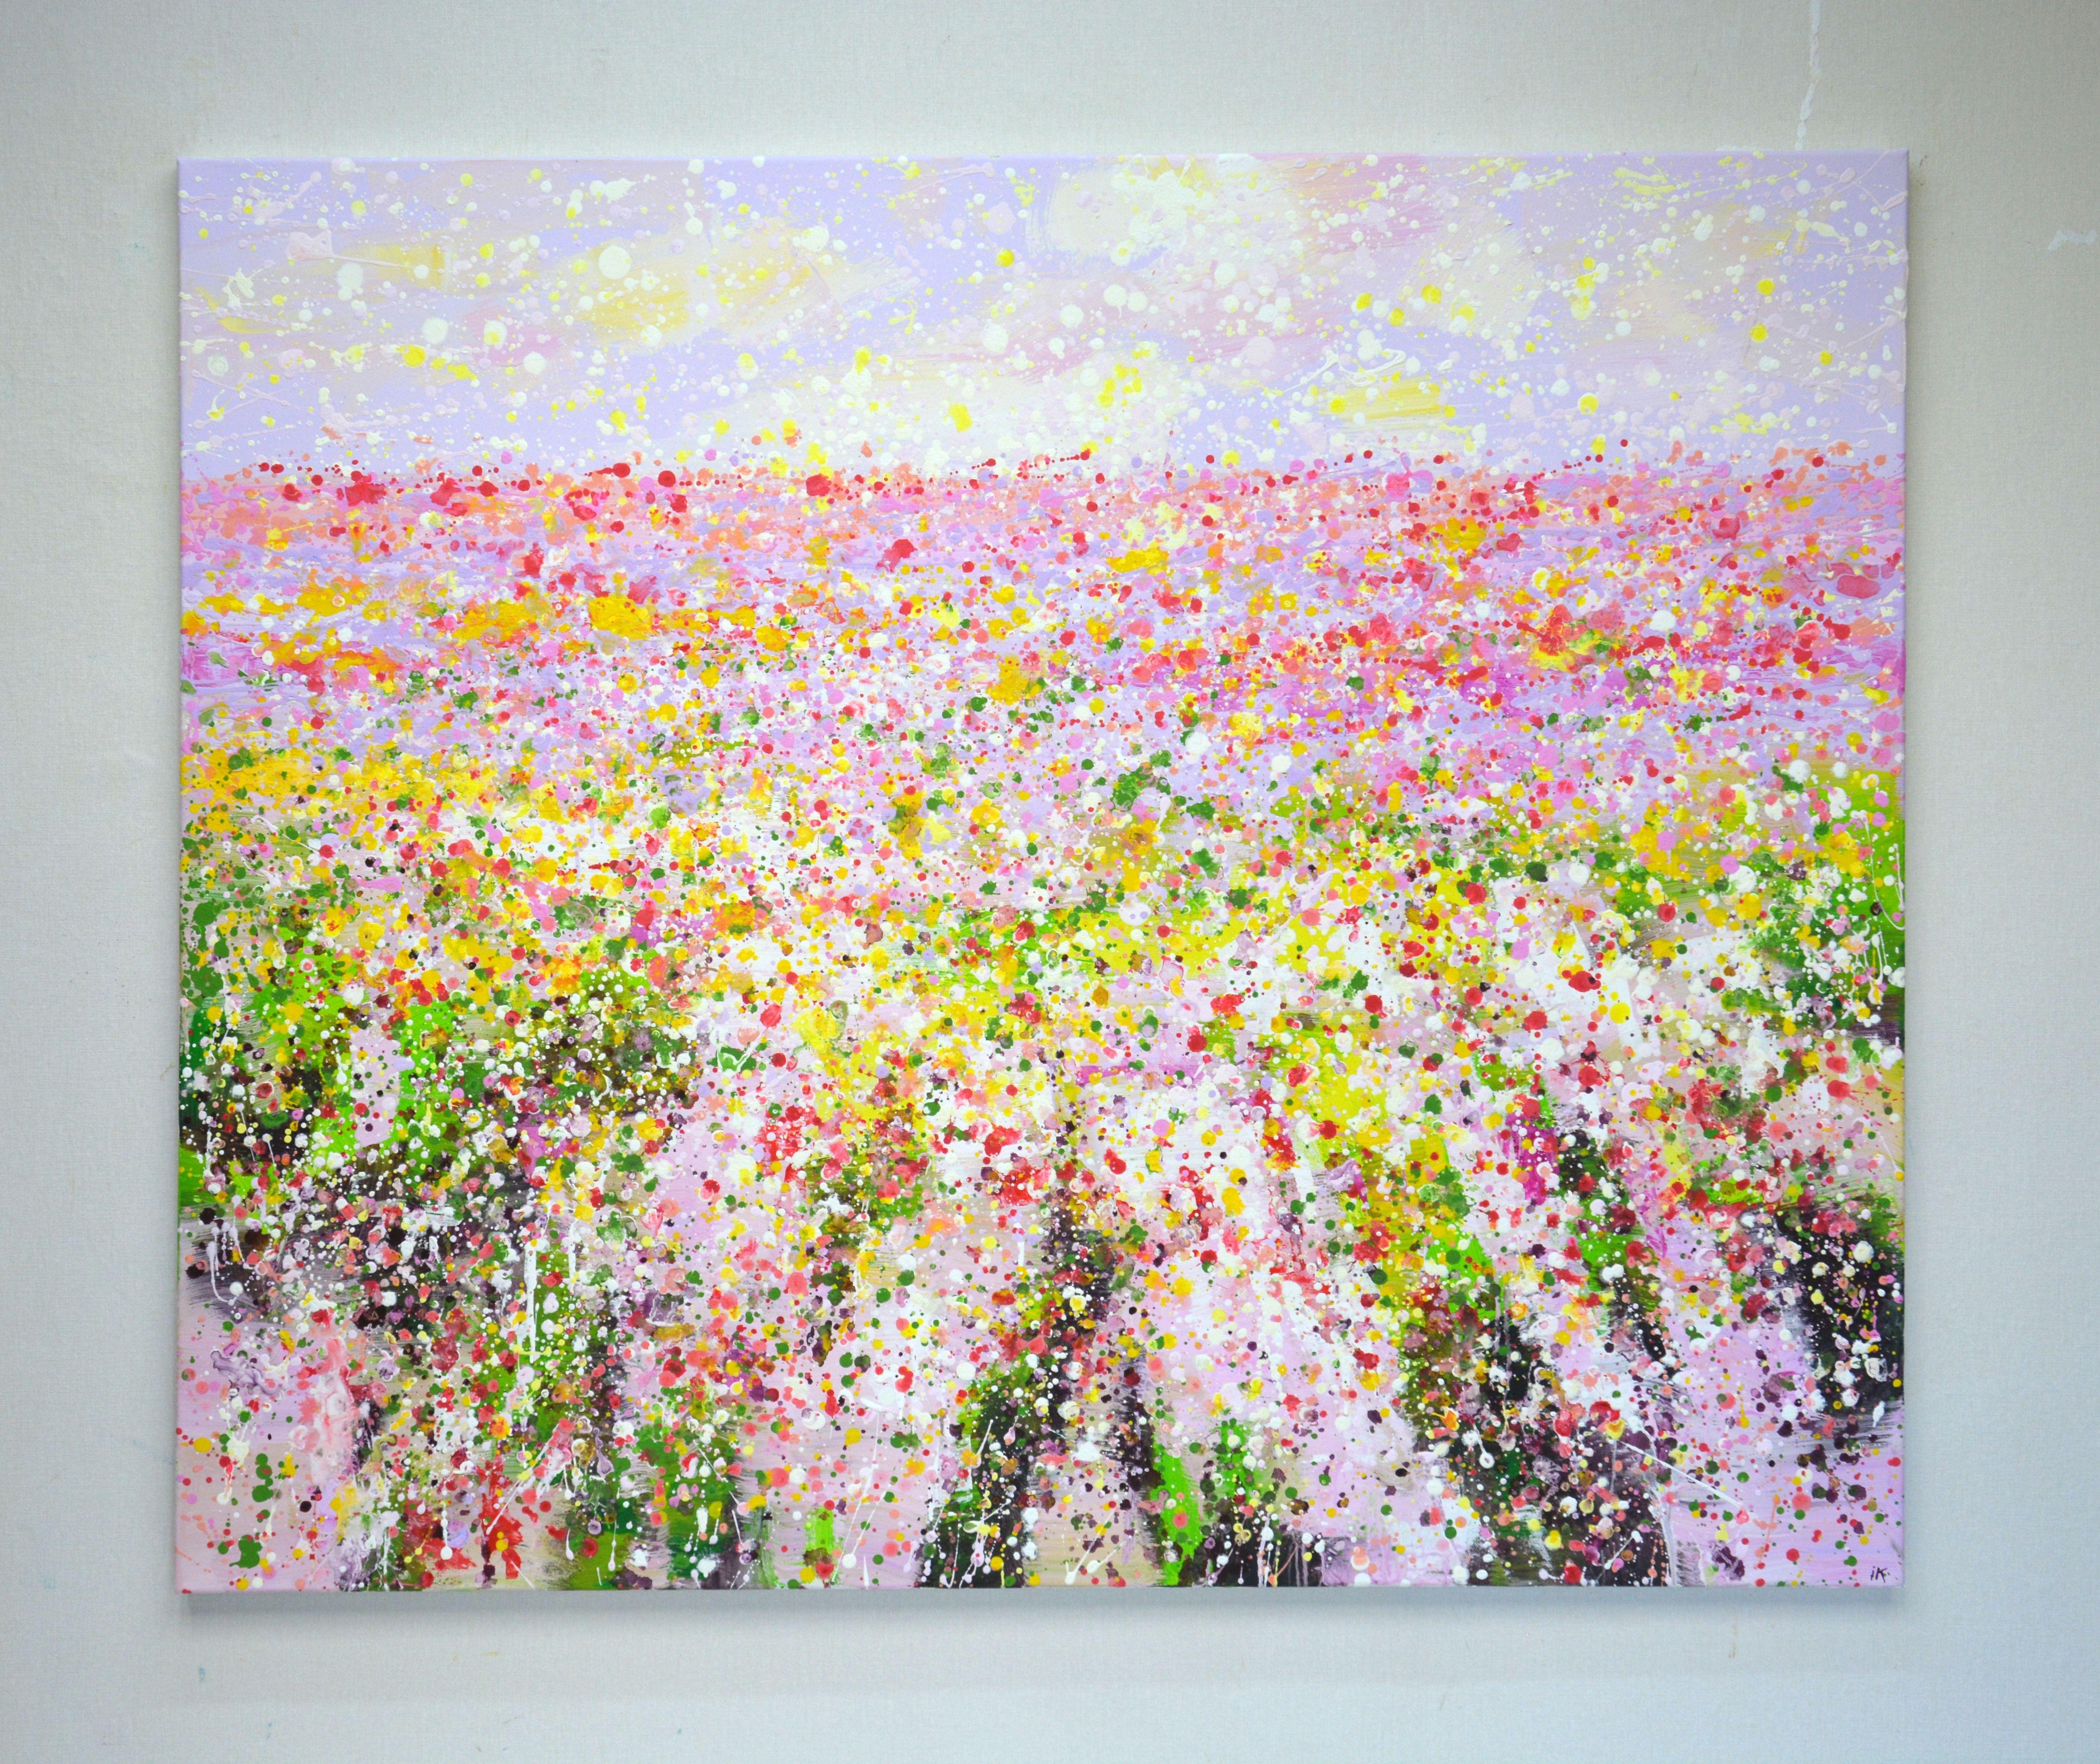 Pink flower field. Summer landscape: a pink field, a celebration of bright flowers and herbs on a summer day creates an atmosphere of relaxation, harmony and bliss. Abstract expressionism. The painting was painted using the technique of dripping and